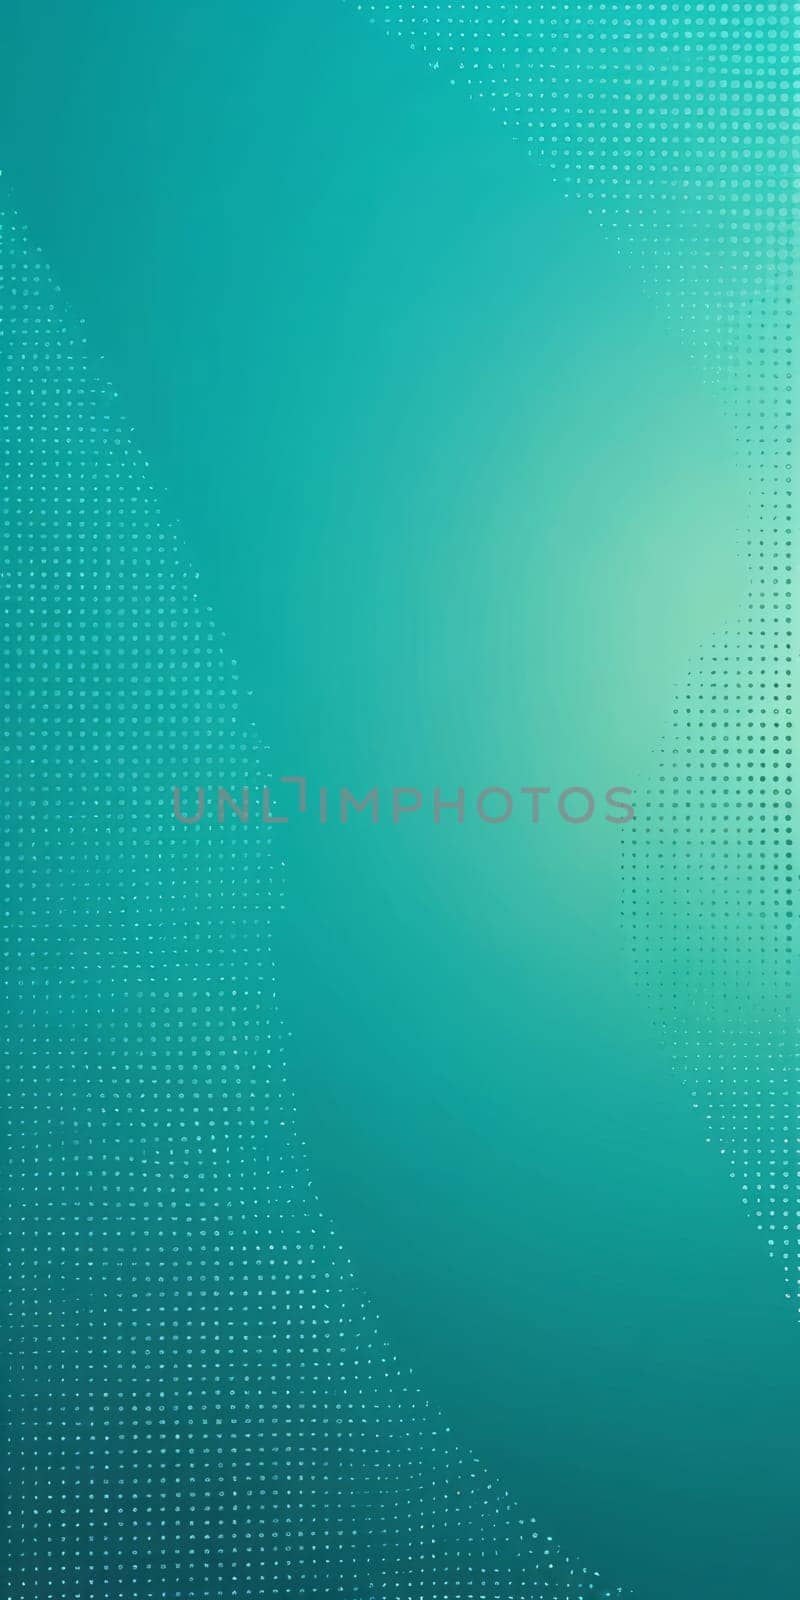 Perforated Shapes in Teal Aqua by nkotlyar